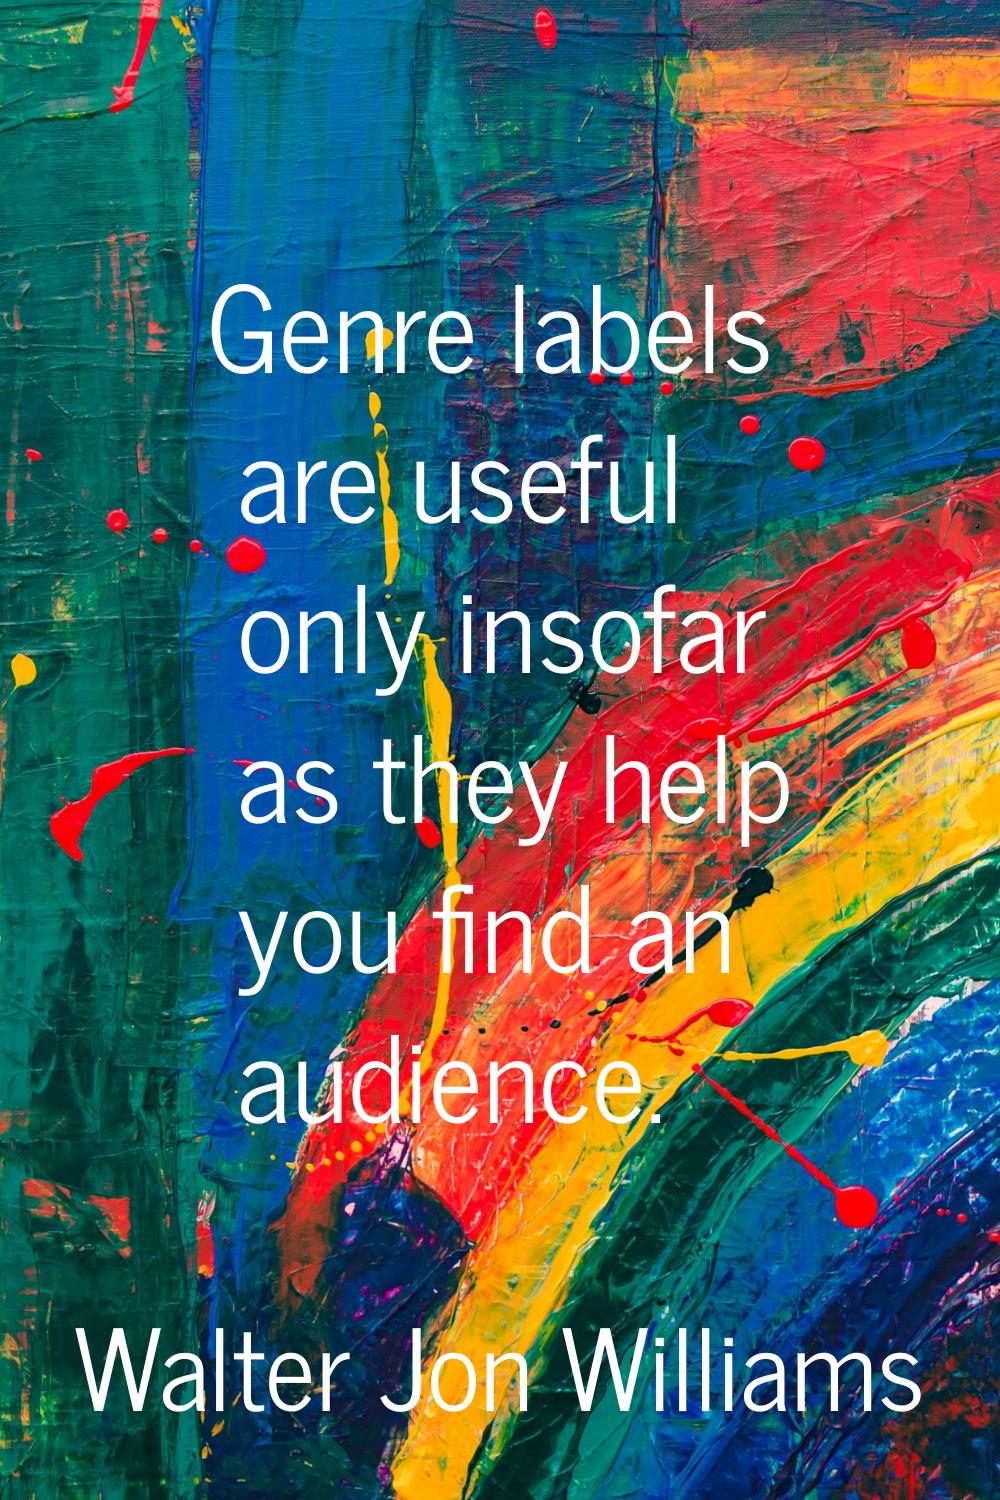 Genre labels are useful only insofar as they help you find an audience.